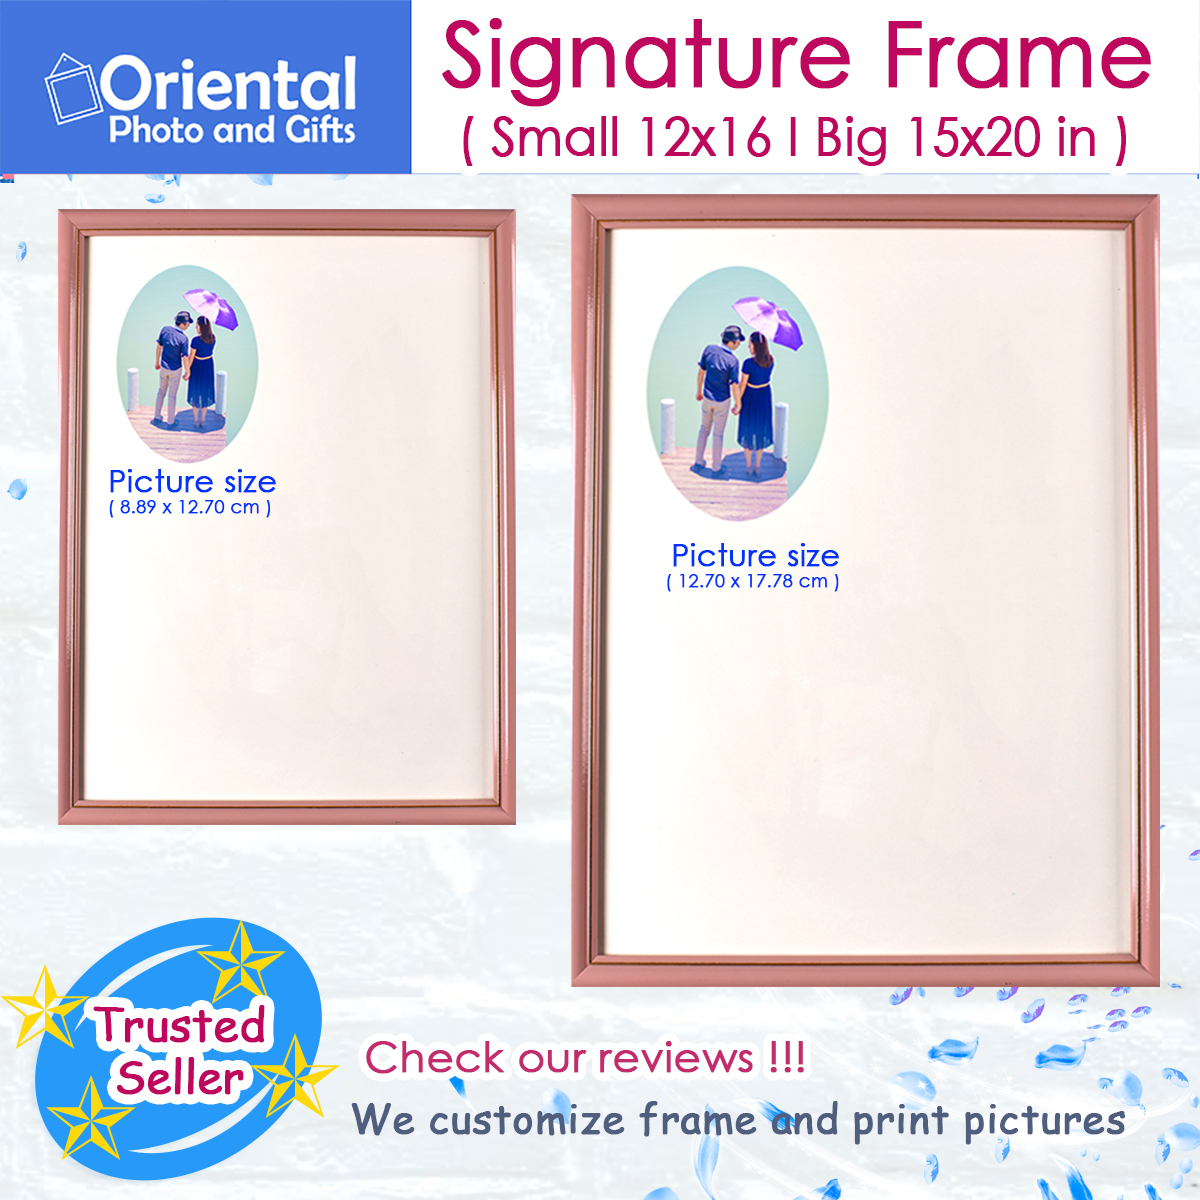 SIGNATURE FRAME ( Small 13x16 and Big 15x20 )